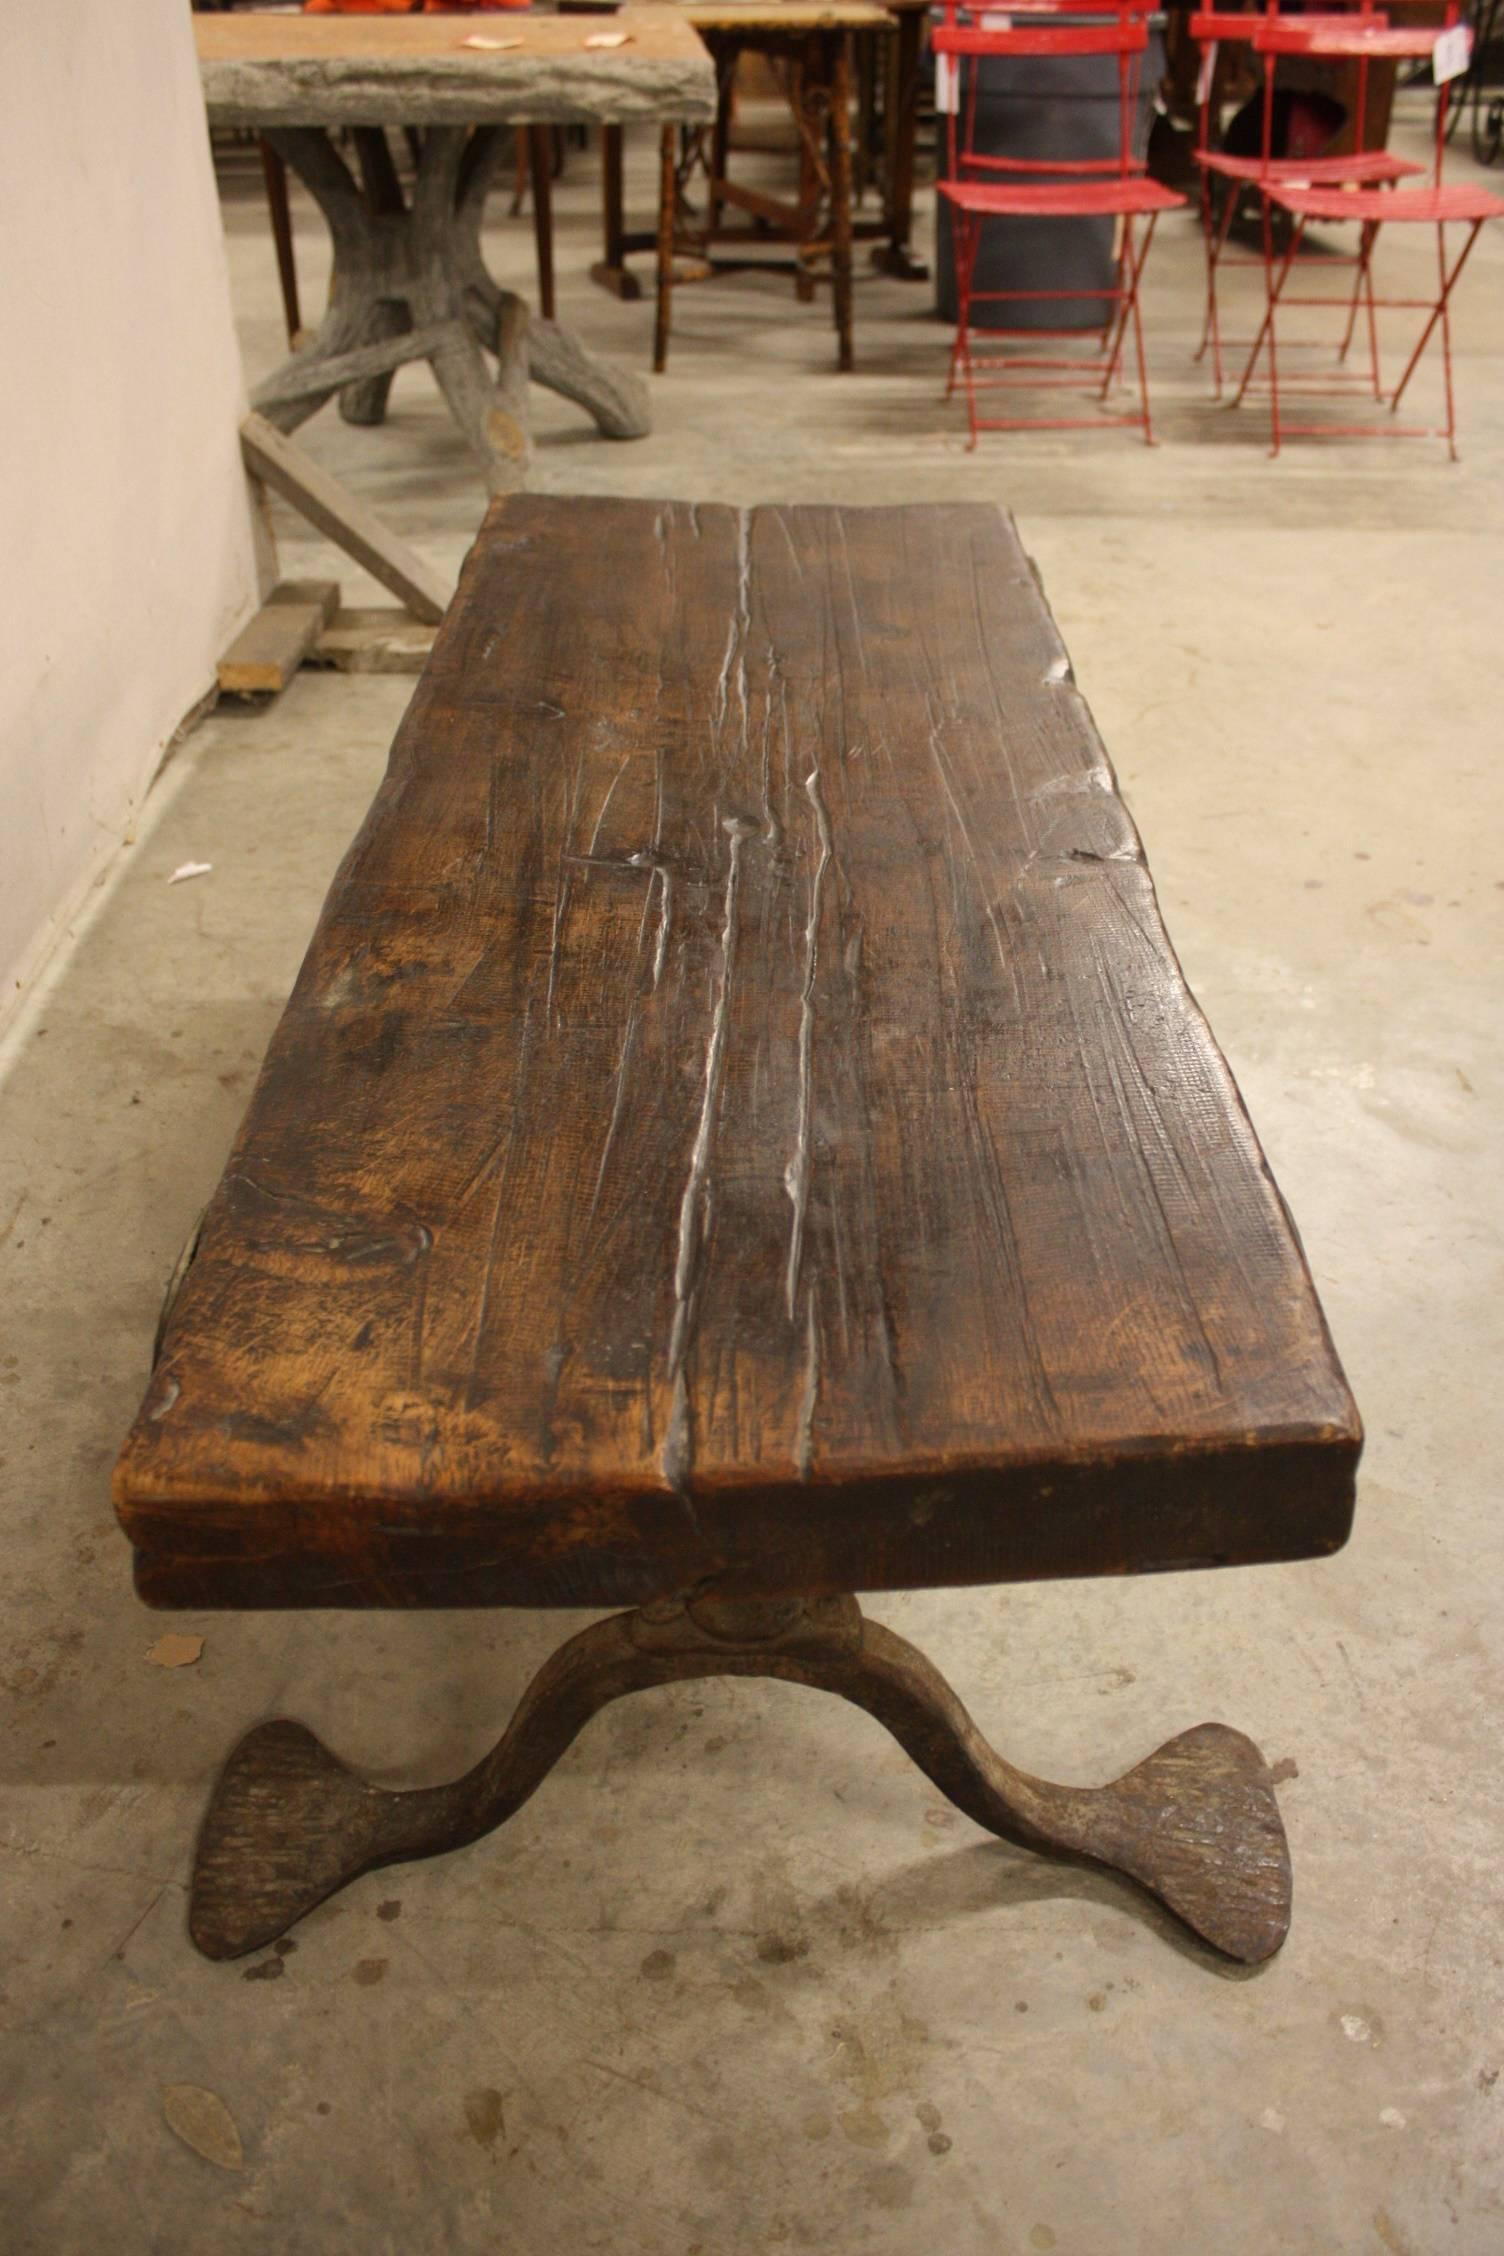 A wonderful mid-19th century coffee table from France. Handsomely constructed with a fabulous hand-forged iron base and walnut top. Serves wonderfully as a coffee table or bench.